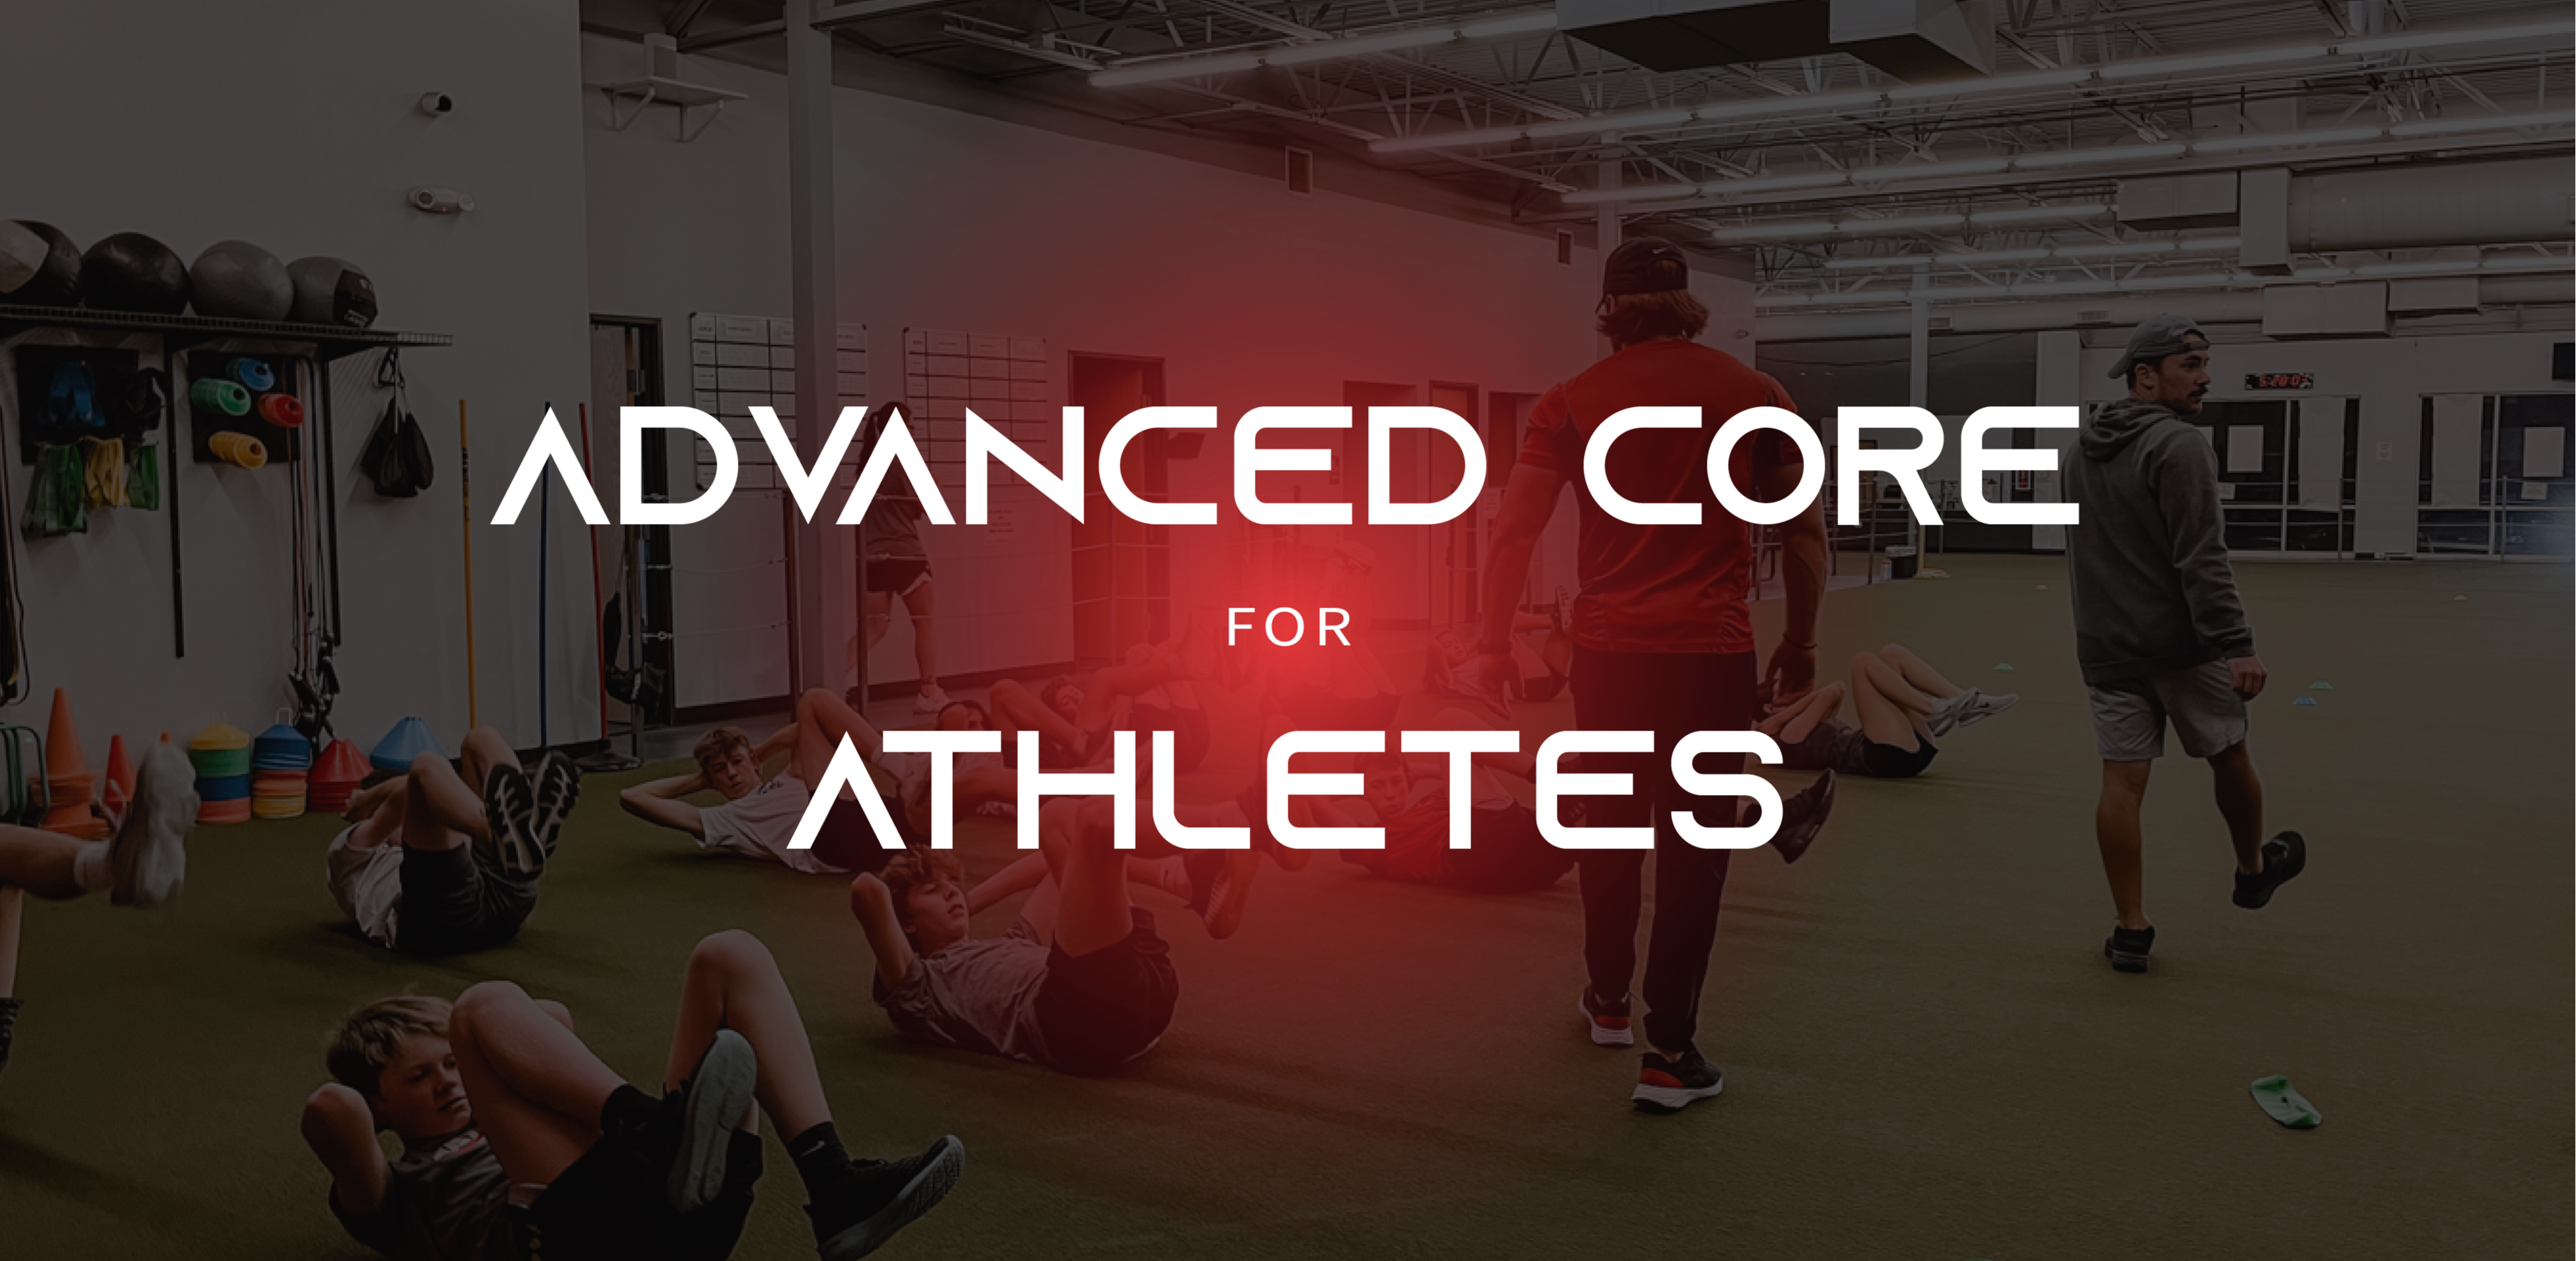 
Advanced Core for Athletes